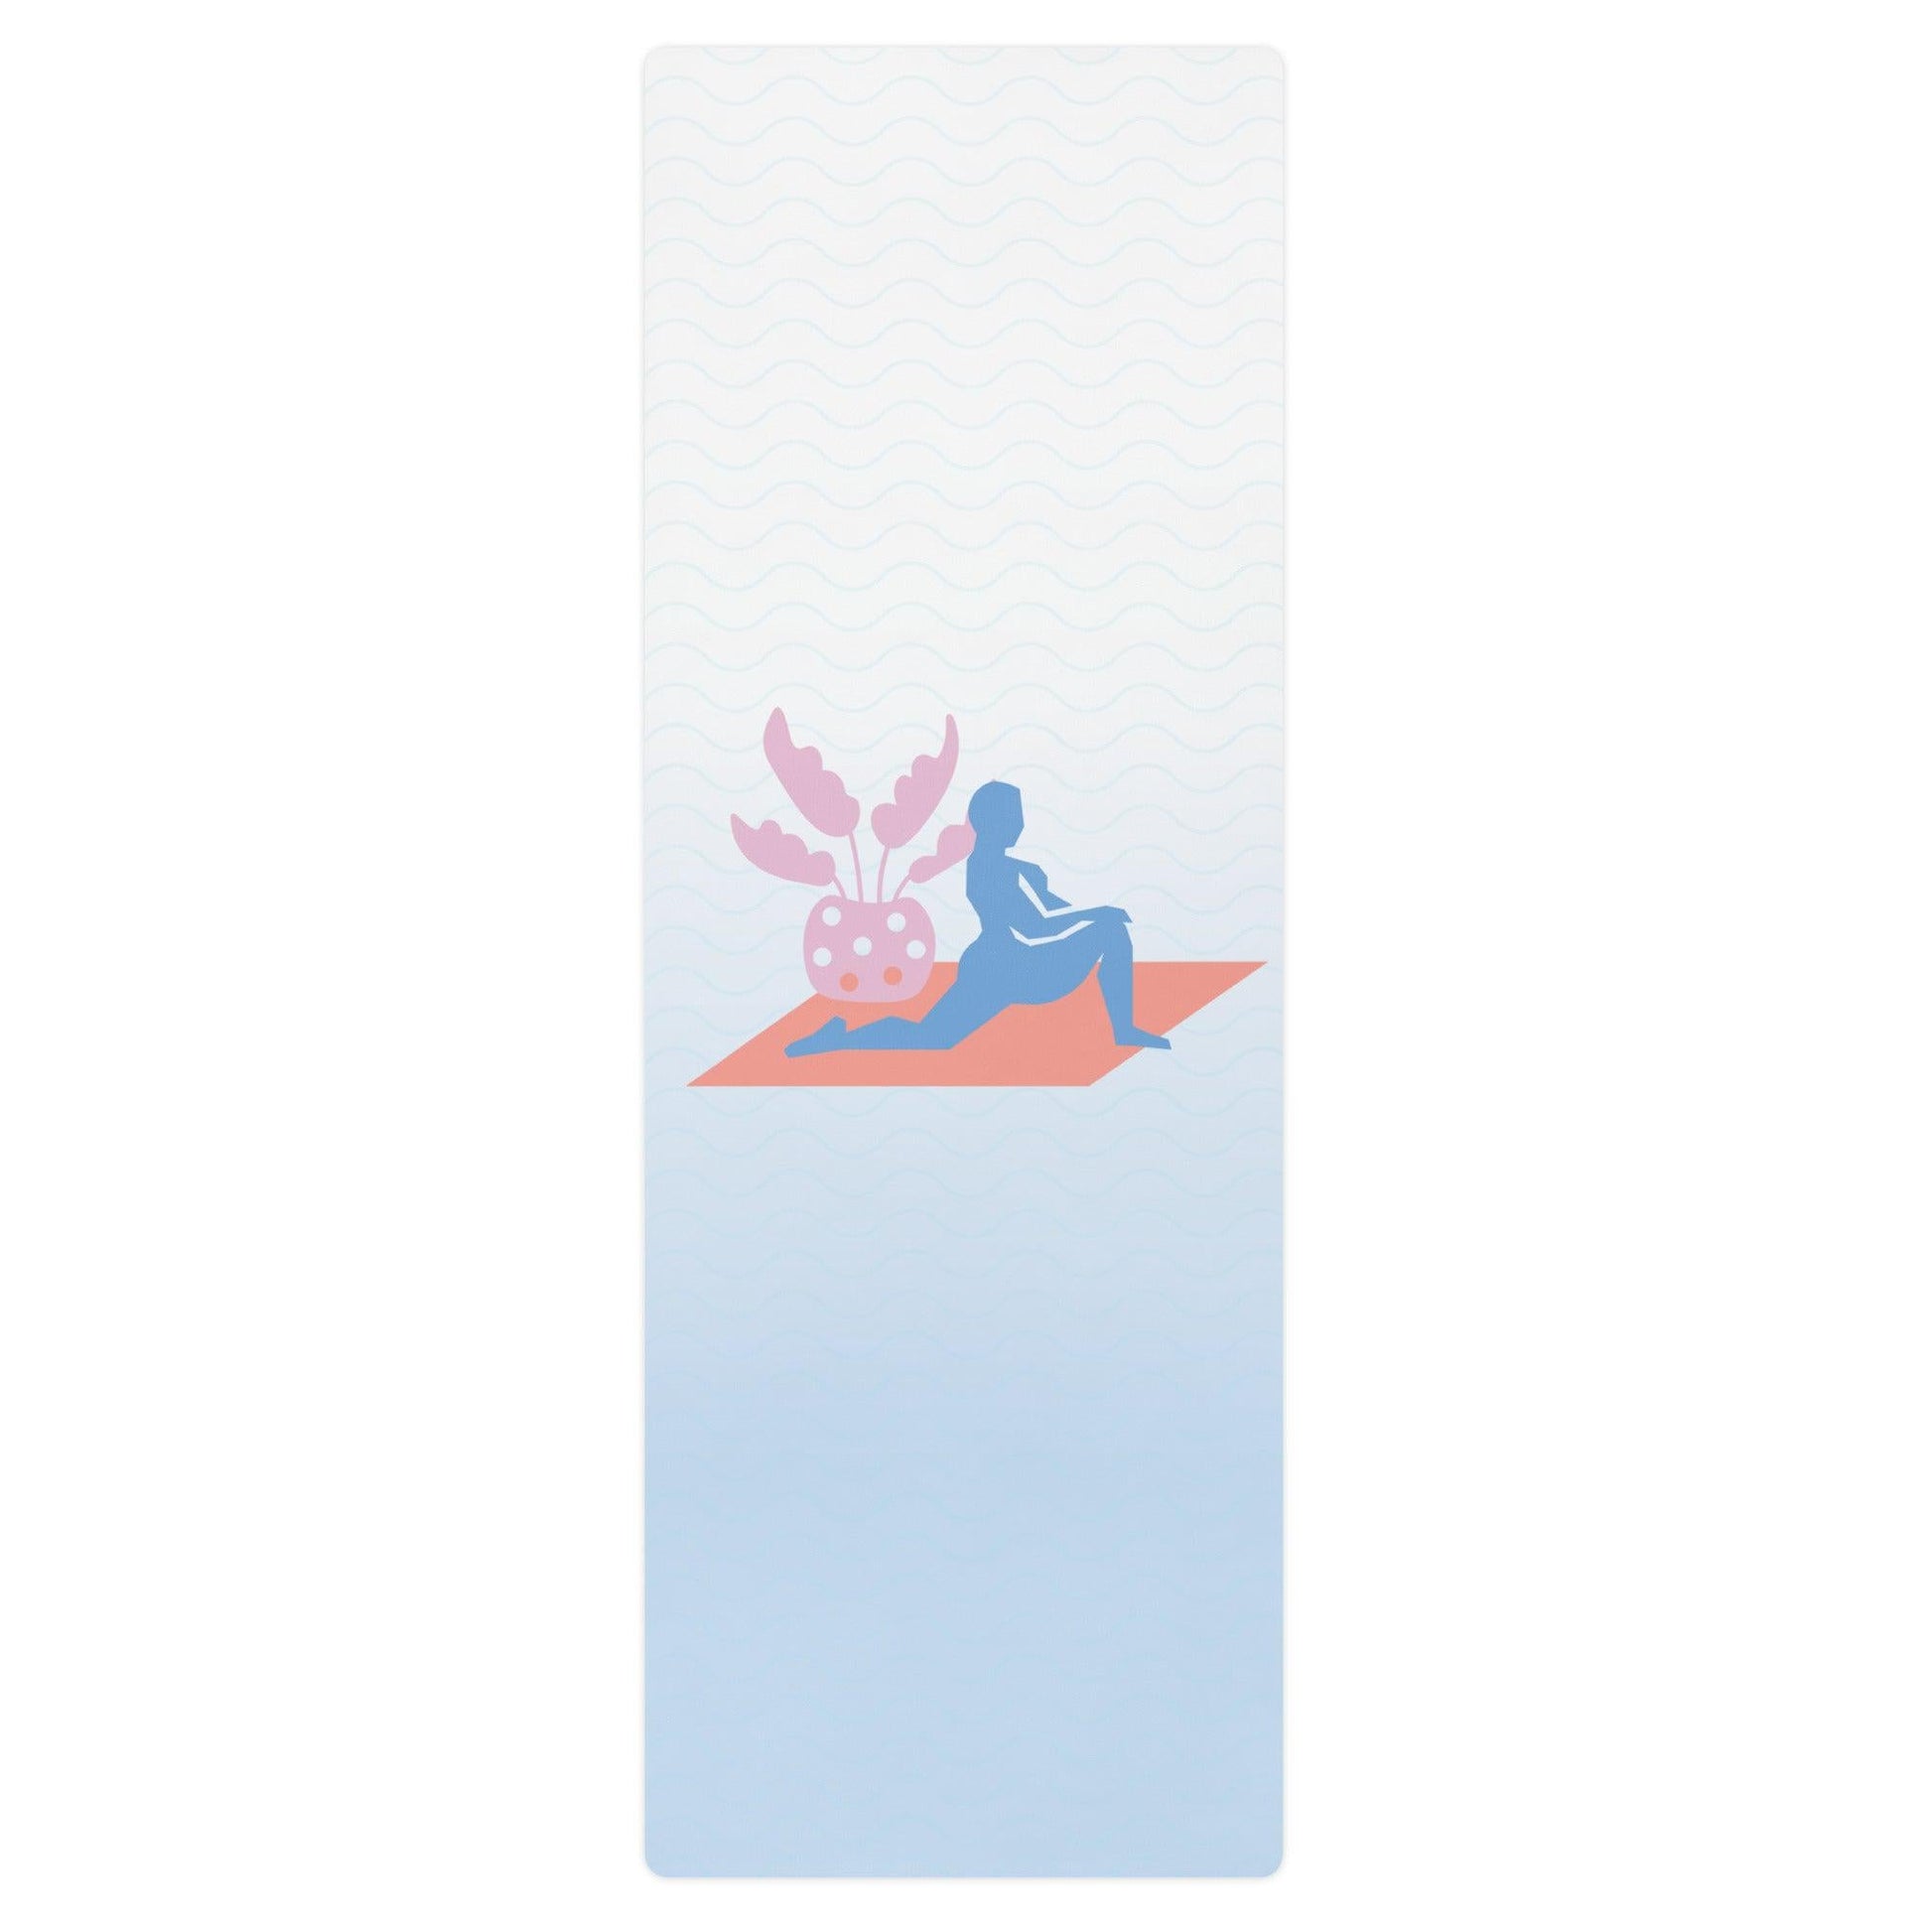 Find Your Zen in the Sky: Sky Blue and White Yoga Mat with Tranquil Yoga Print